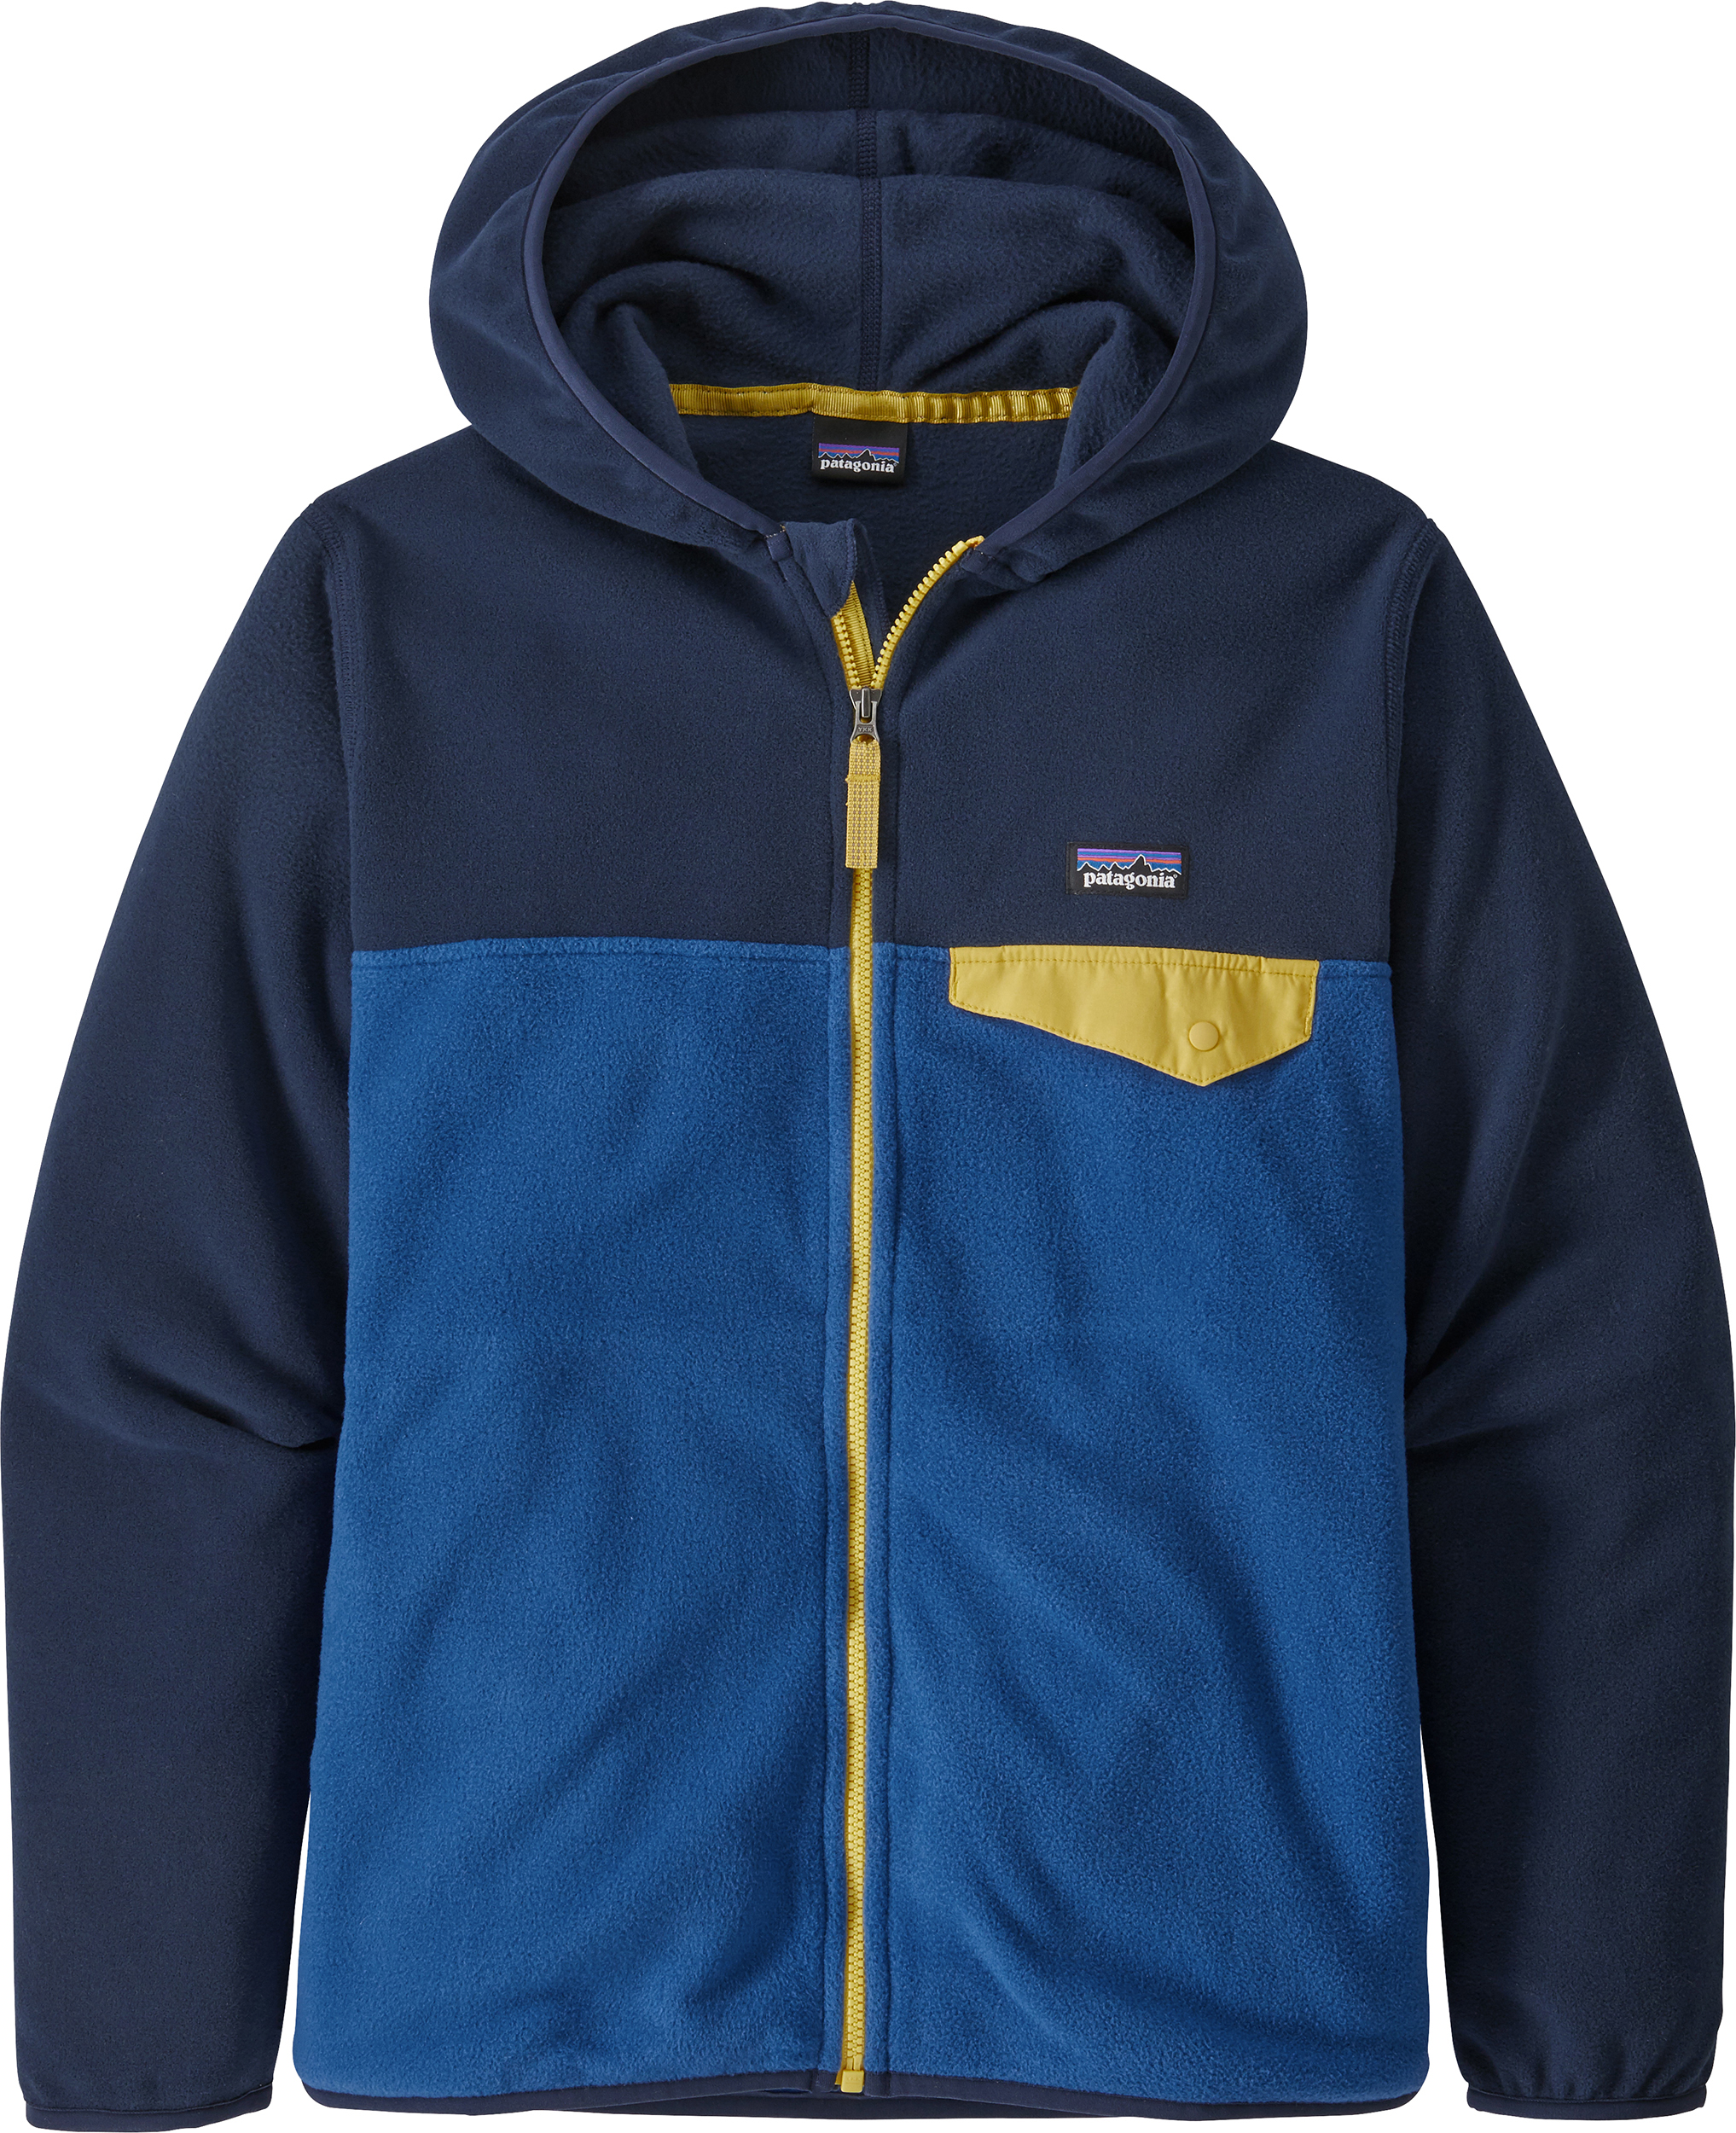 Patagonia Micro D Snap T Jacket - Boys' - Youths